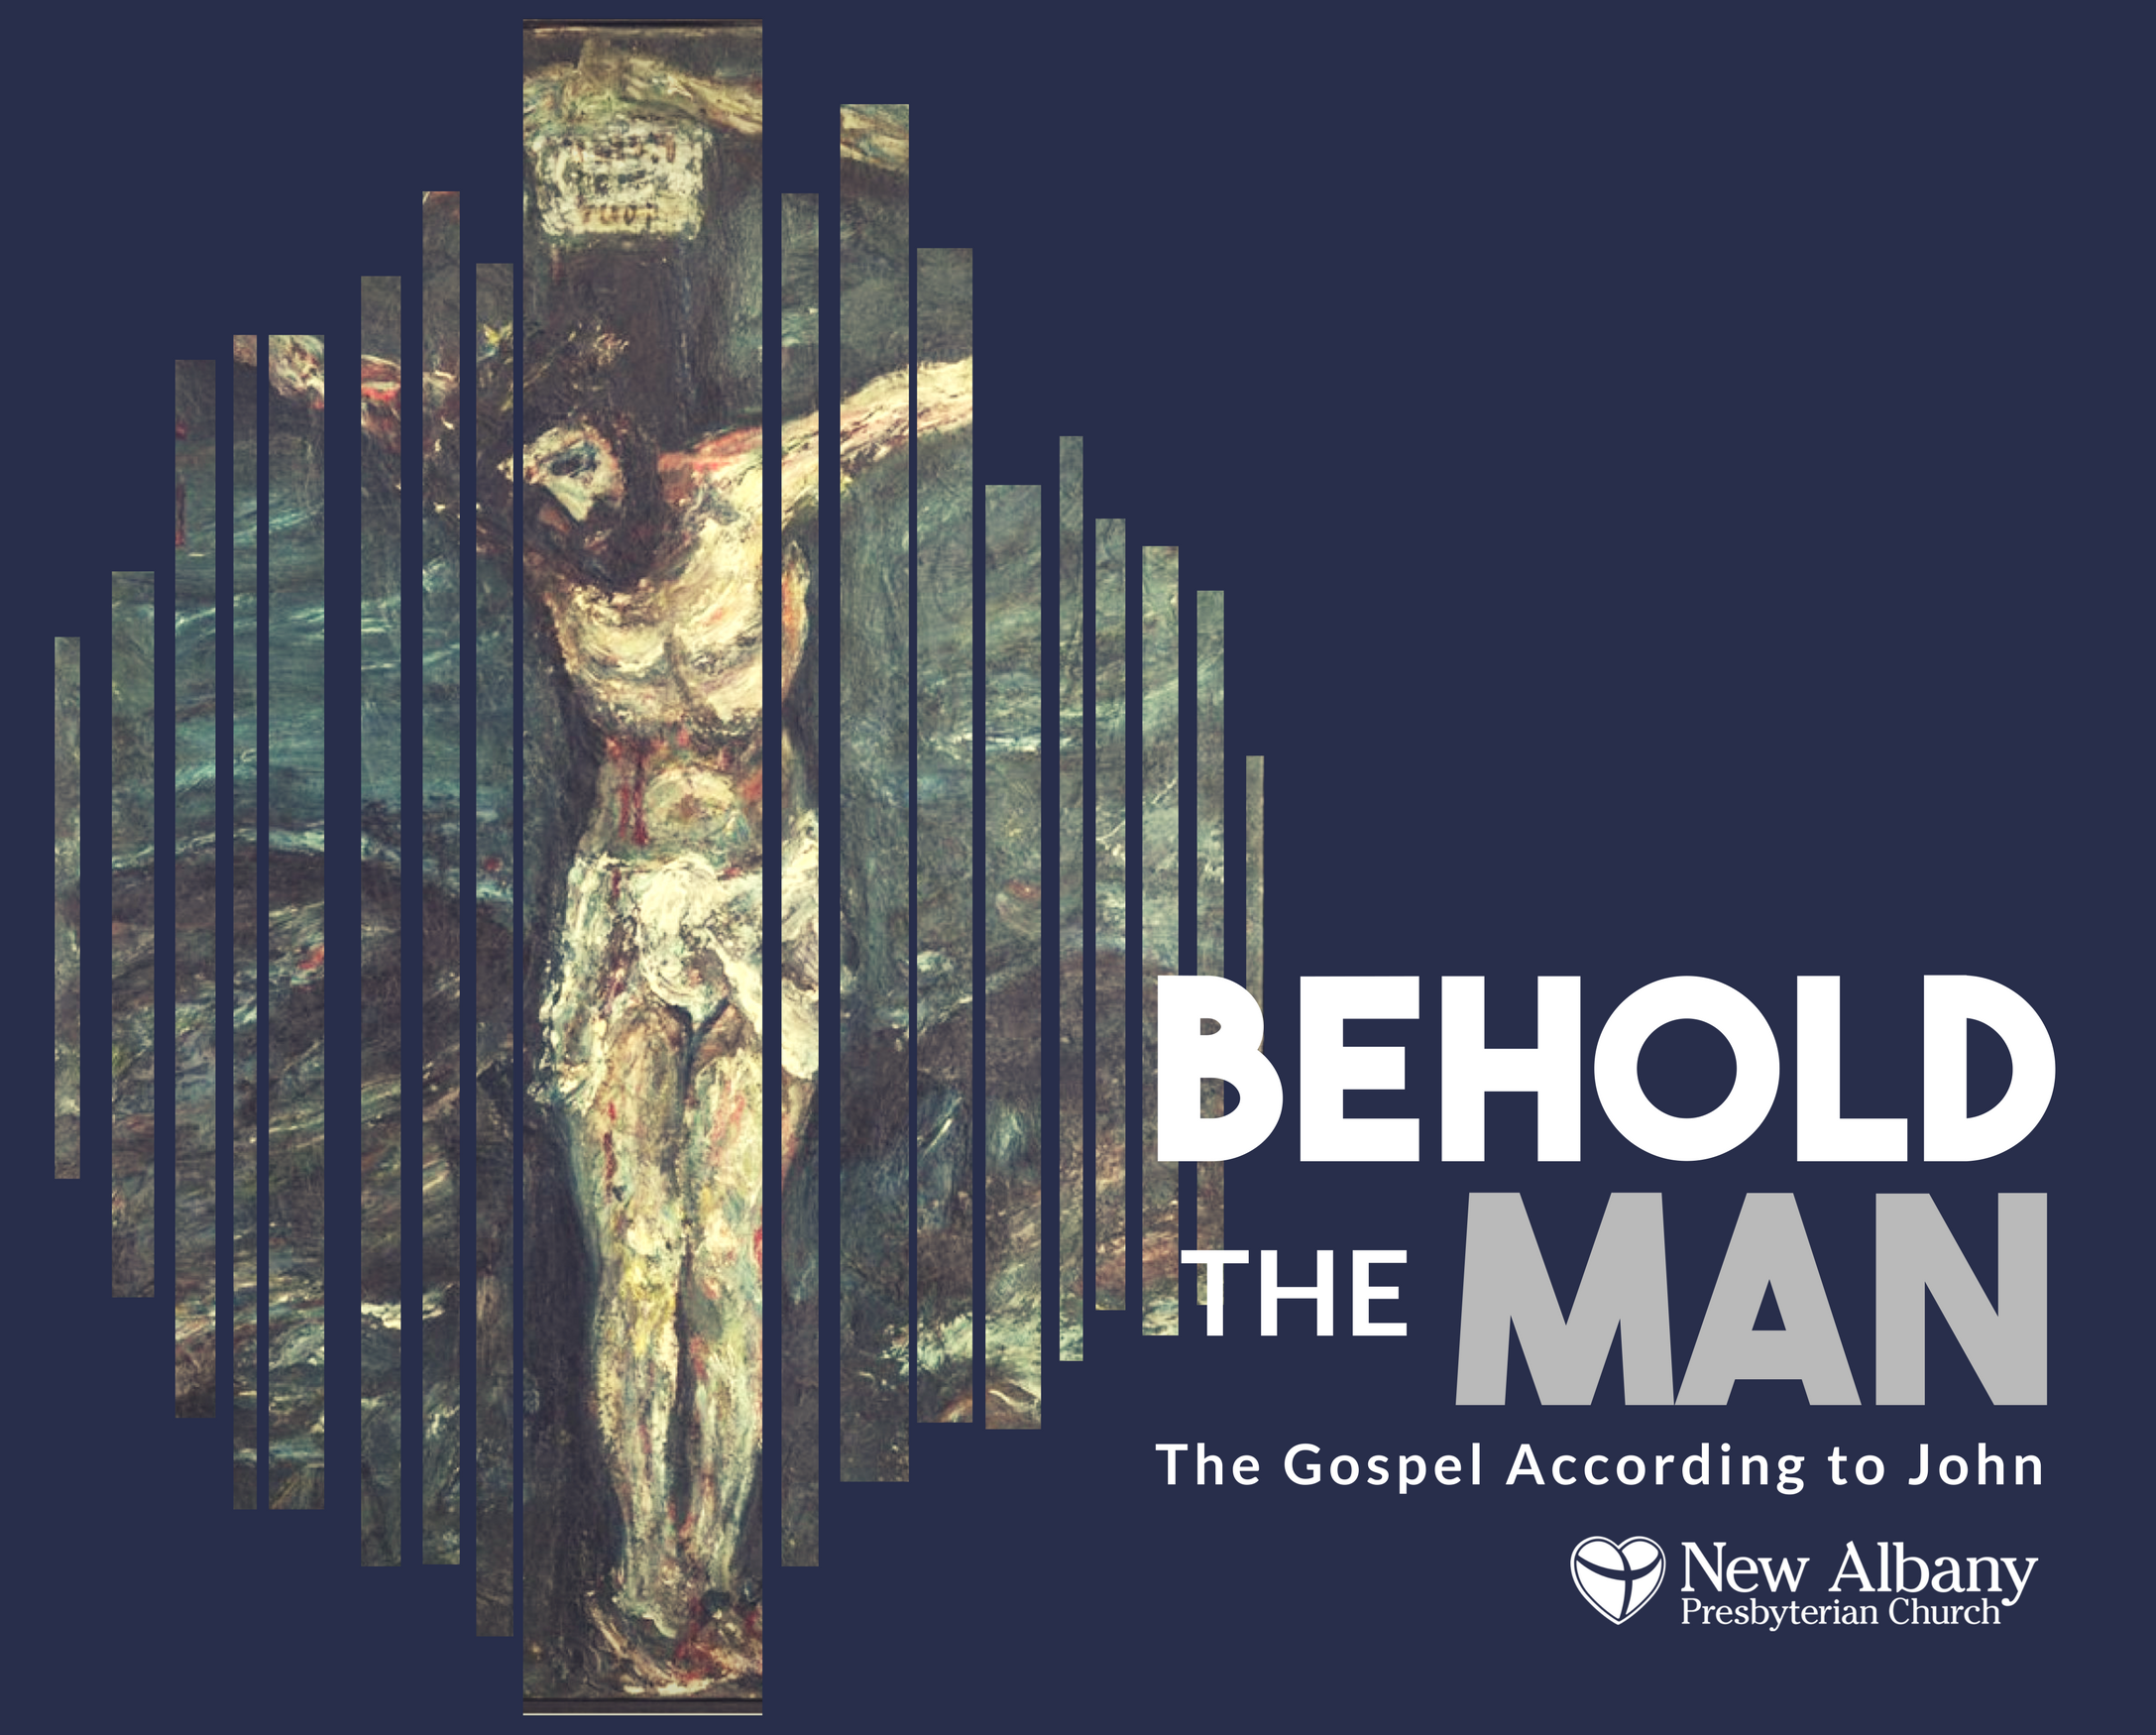 Behold the Man: John’s Purpose and Our Purpose